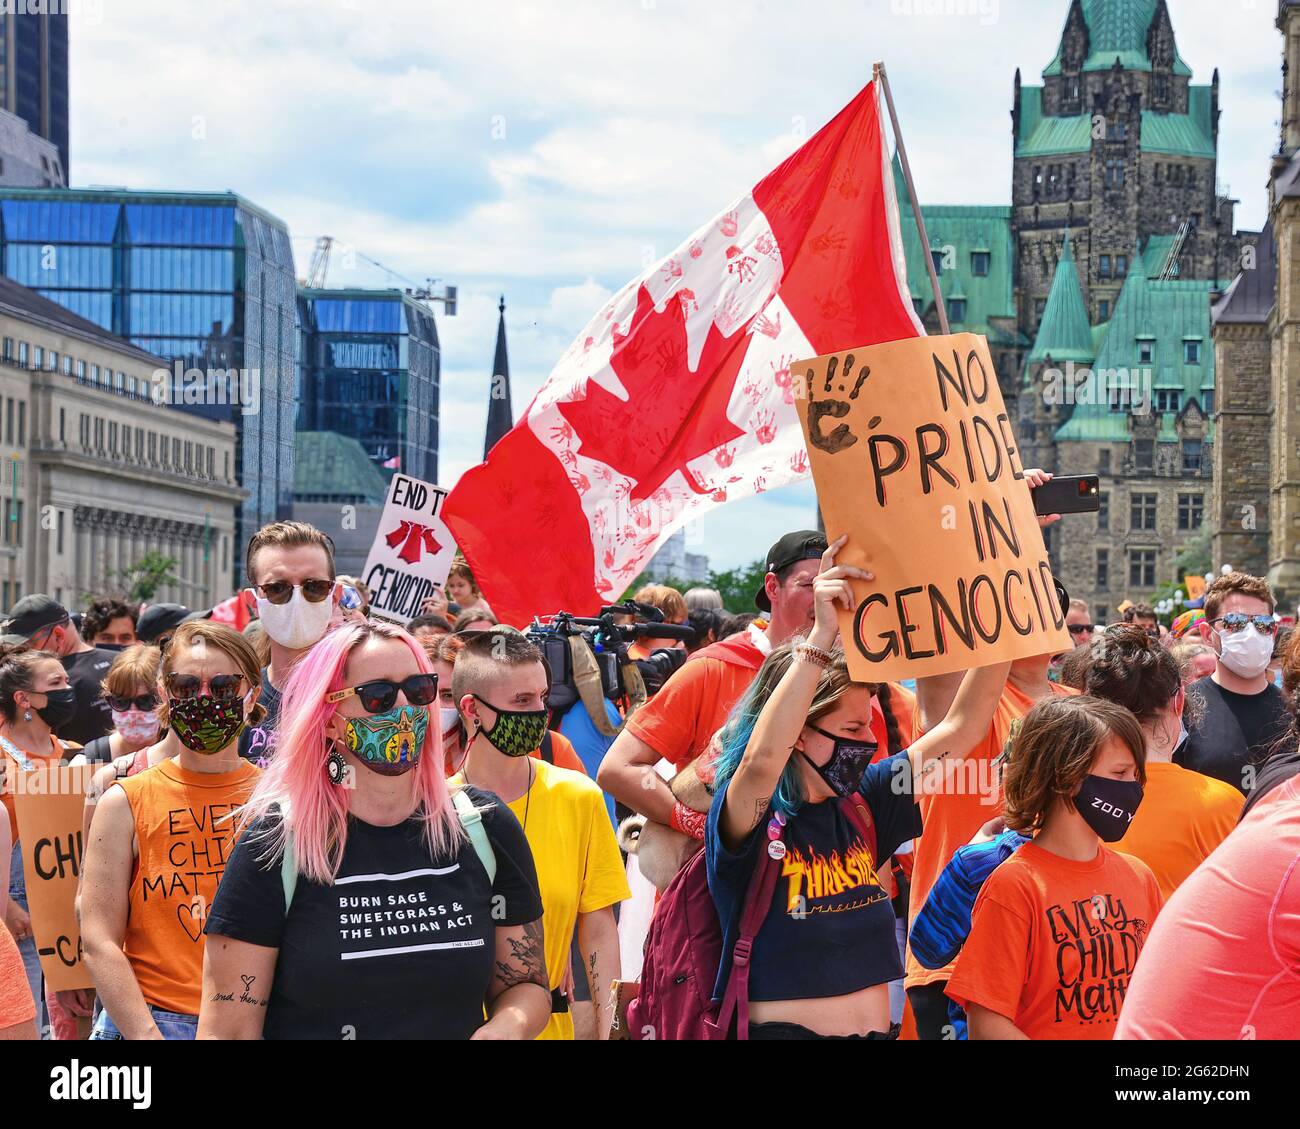 Ottawa, Canada - July 1, 2021: Thousands marched in the Cancel Canada Day march which ended up with a rally on Parliament Hill. They believe it is not proper to celebrate Canada